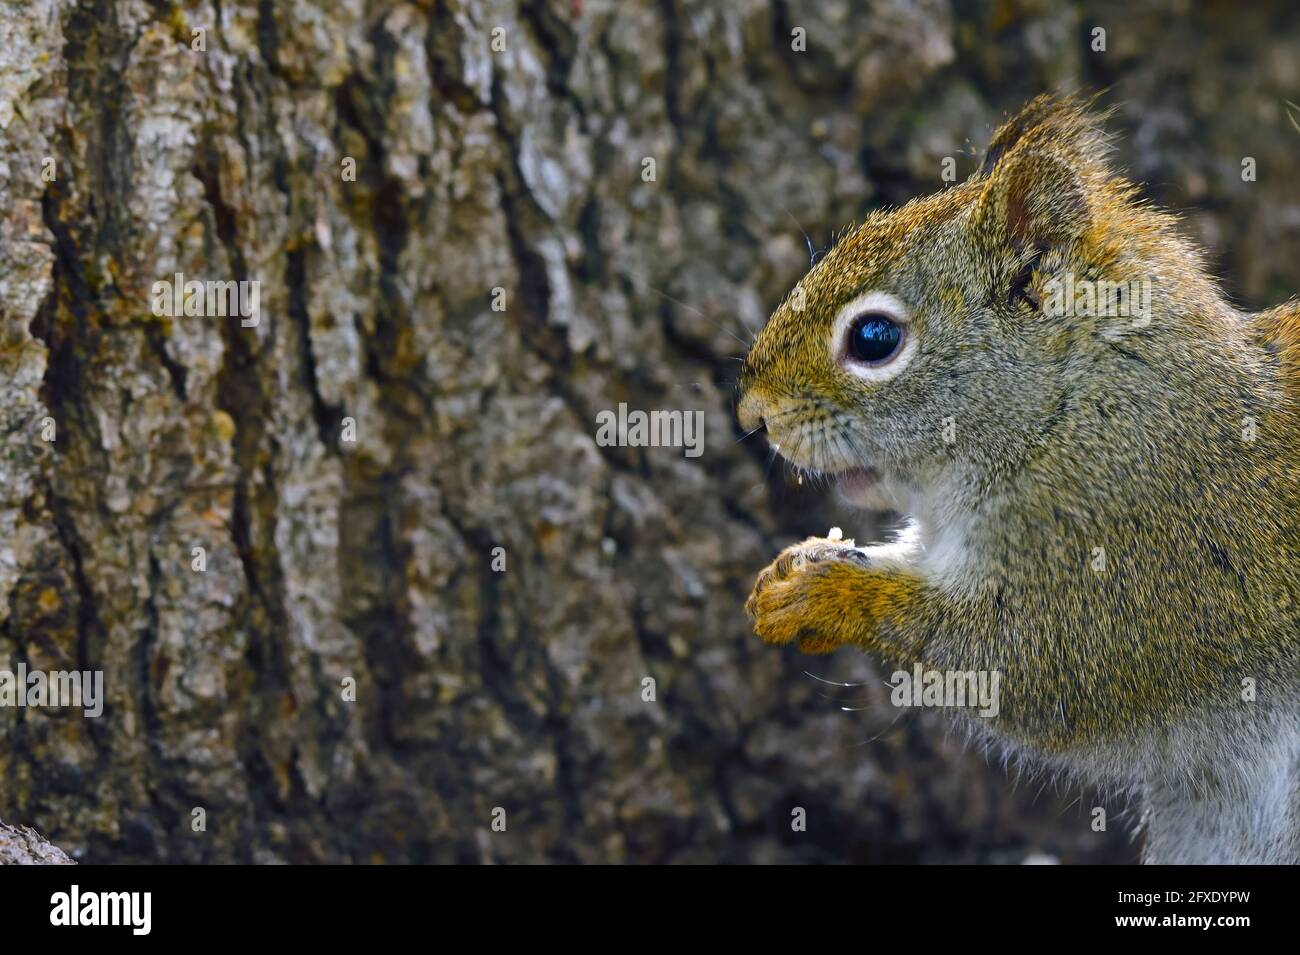 A close up image of a wild red squirrel 'Tamiasciurus hudsonicus', feeding on a seed in rural Alberta Canada. Stock Photo